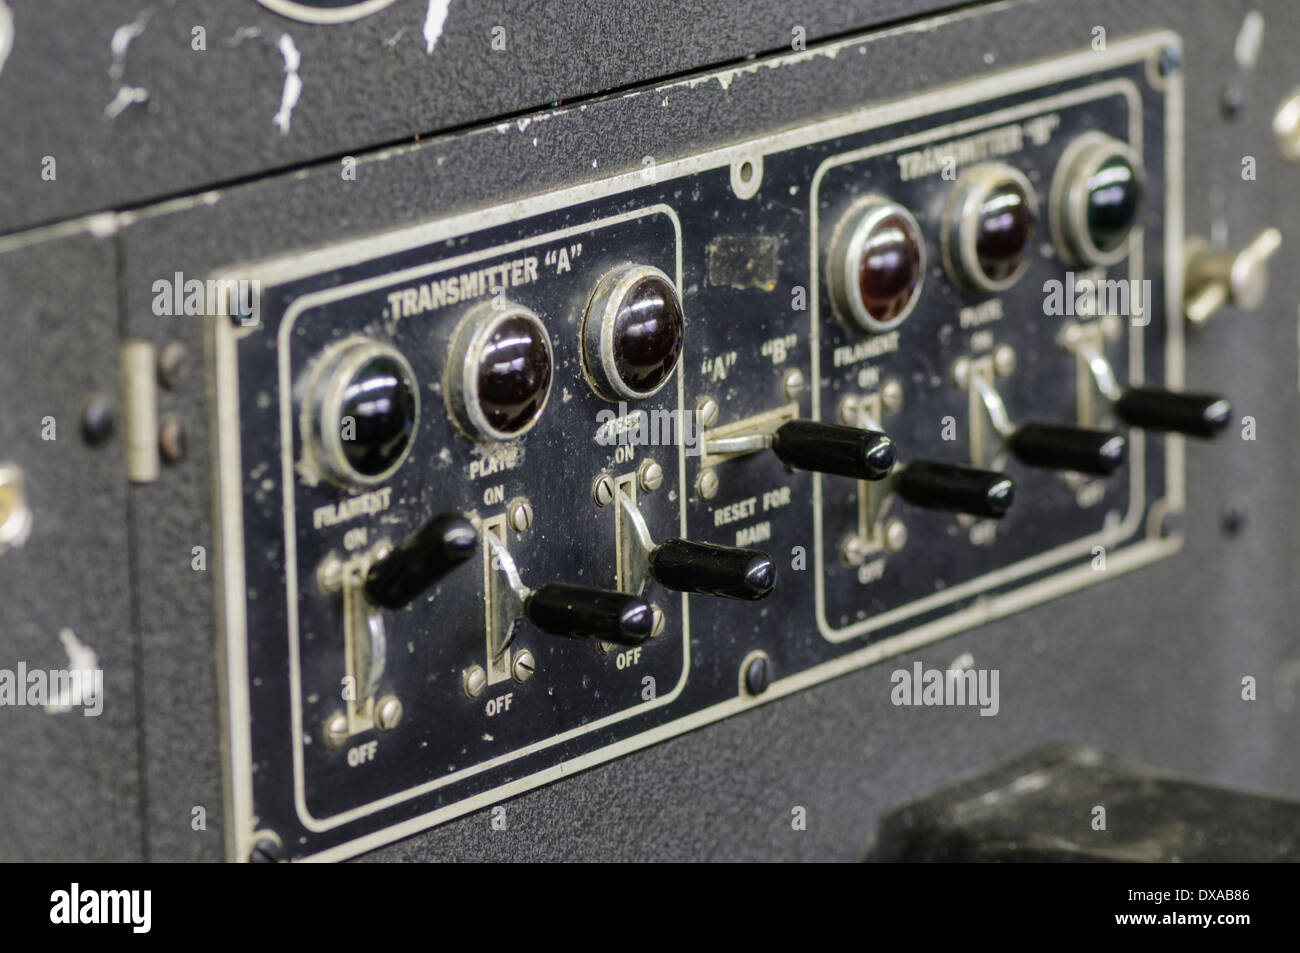 Controls on an old fashioned radio transmitter Stock Photo